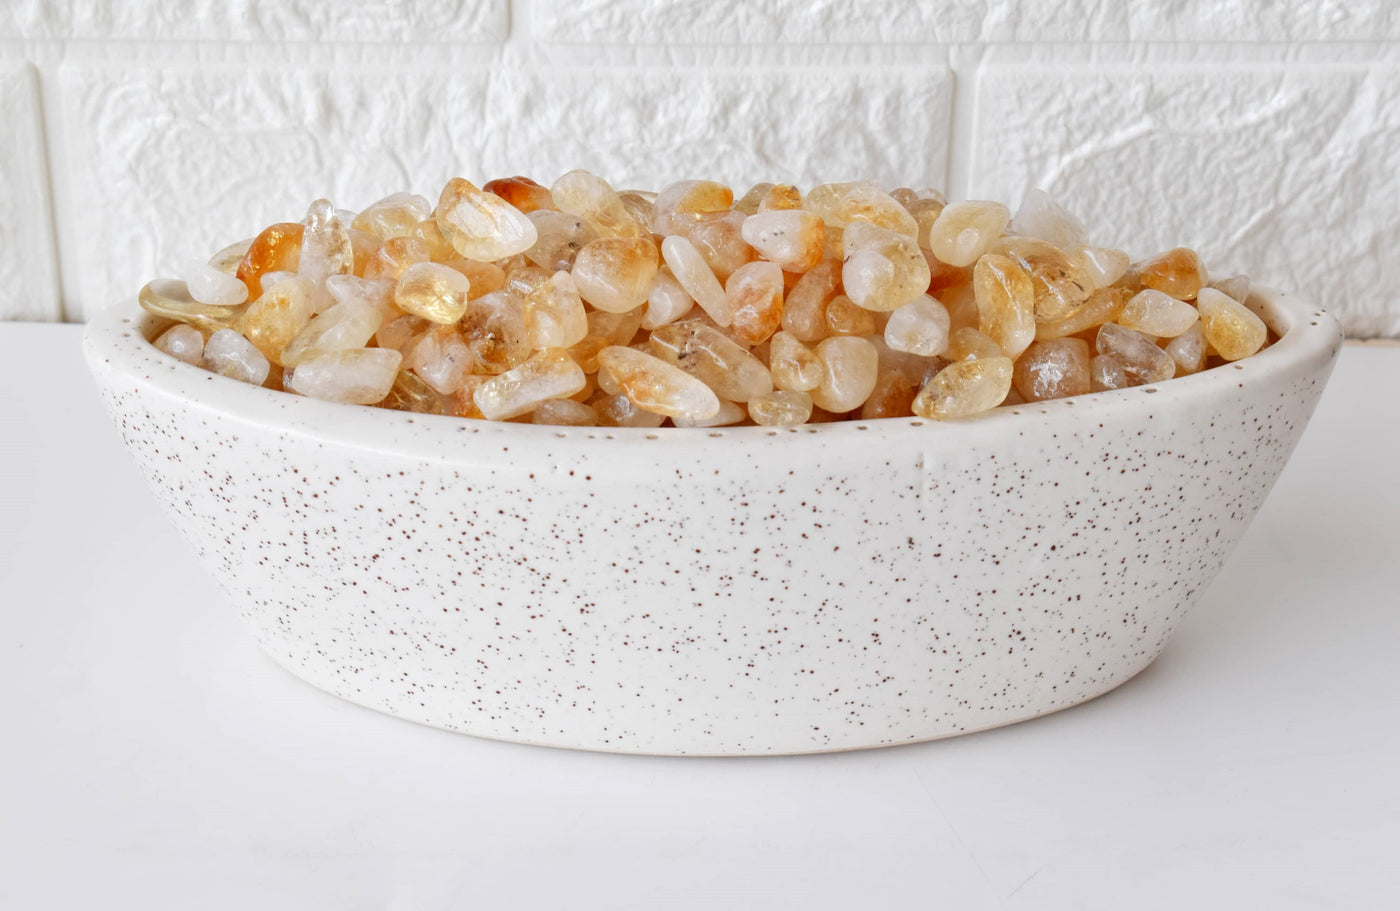 Citrine Tumbled Crystals (Stress Relief and Weight Control)